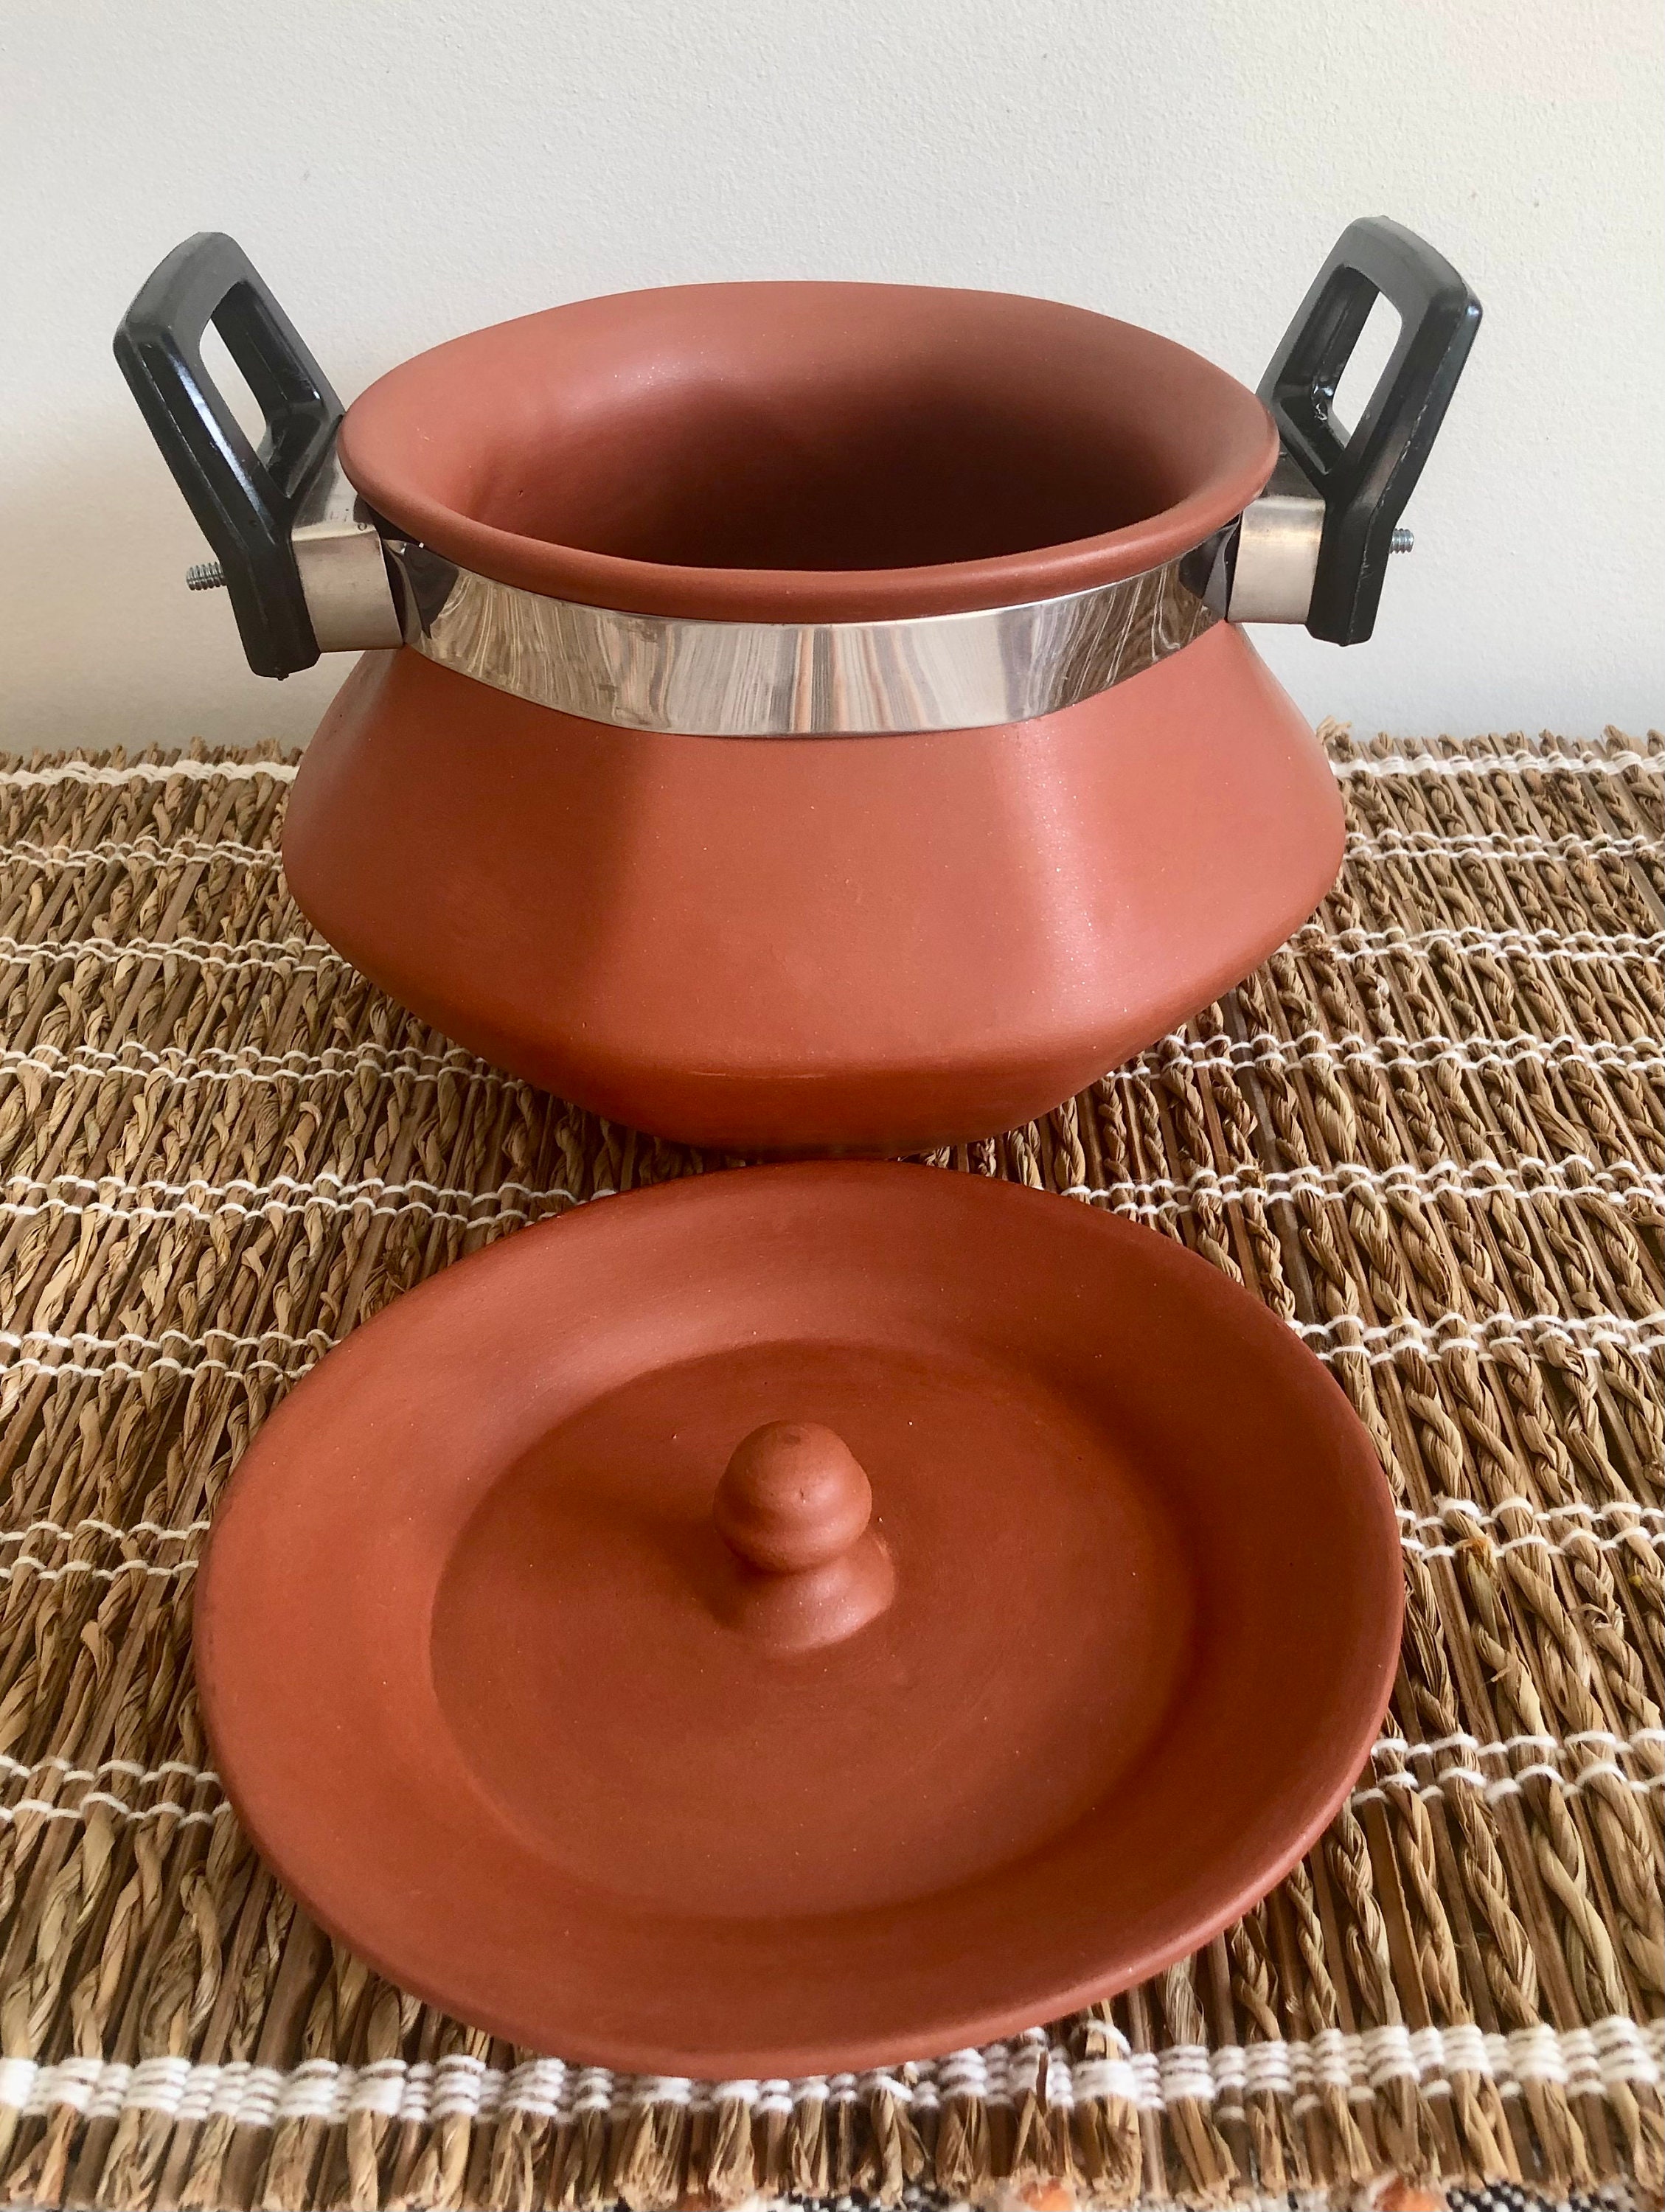 Verka's Clay Pot for Cooking. Unglazed and 100% Natural Terracotta